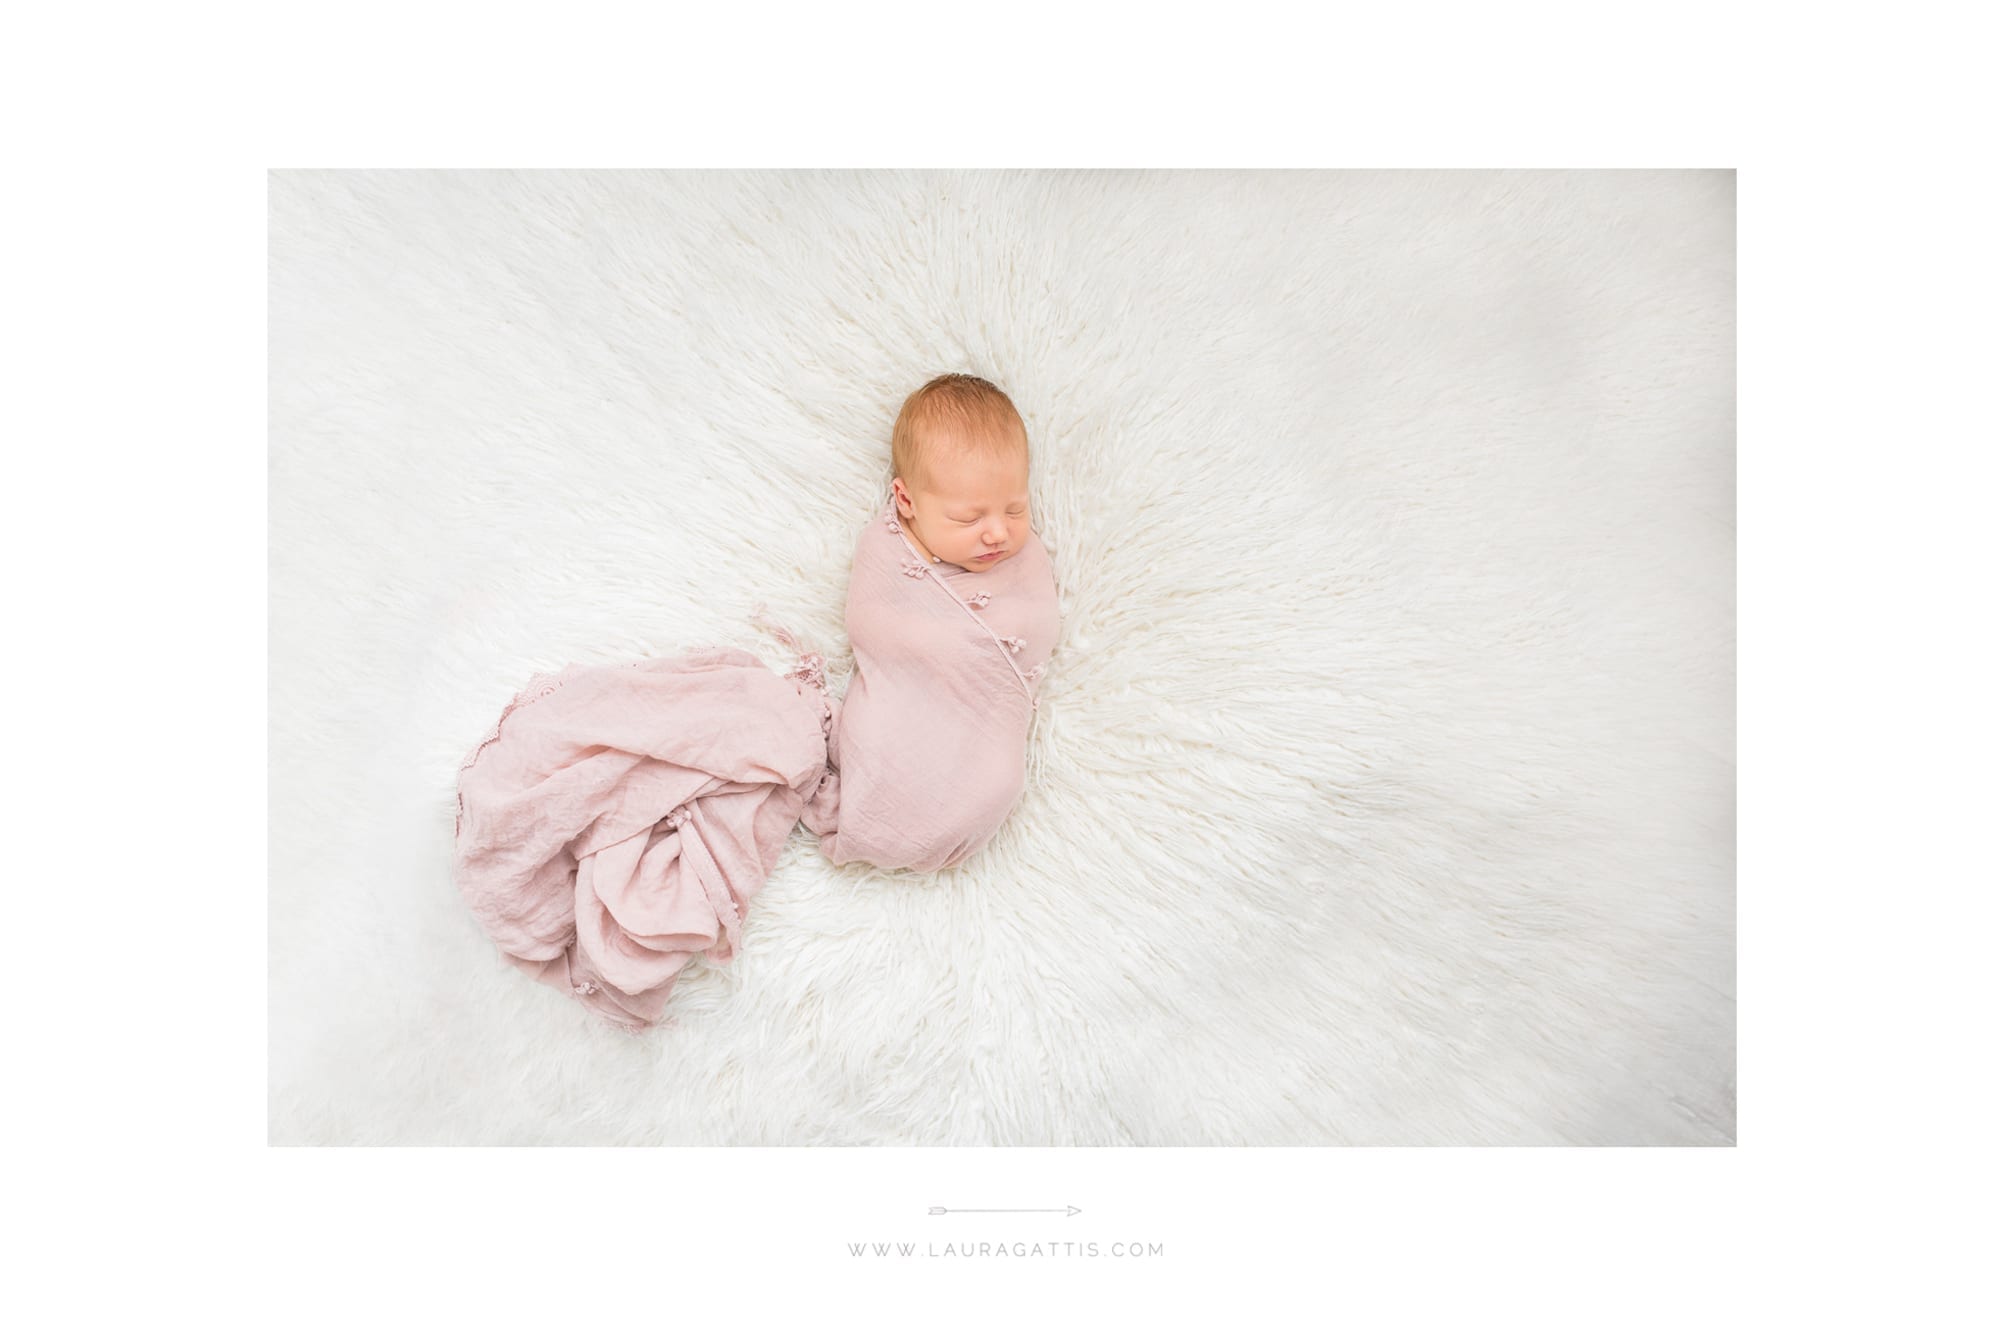 natural light studio newborn and sibling session | laura gattis photography